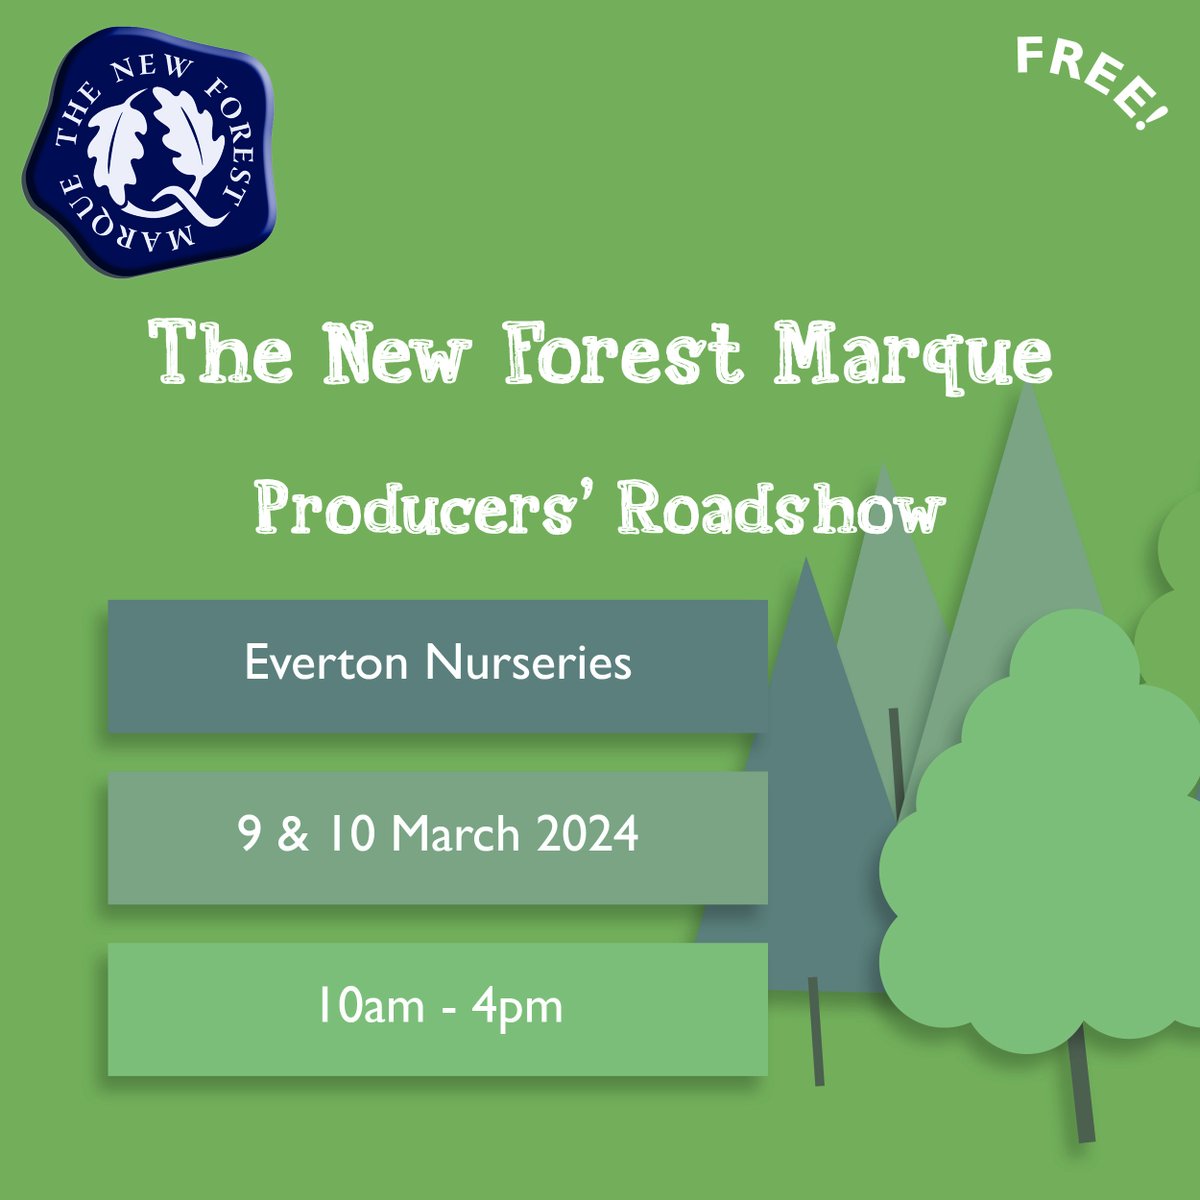 Are you joining us at our Producers' Roadshow next weekend? 🛒🌱 As part of #AwakeningFestival, we're hosting a market at #EvertonNurseries featuring a selection of local food, drinks and crafts from our fantastic New Forest Marque members. See you there!